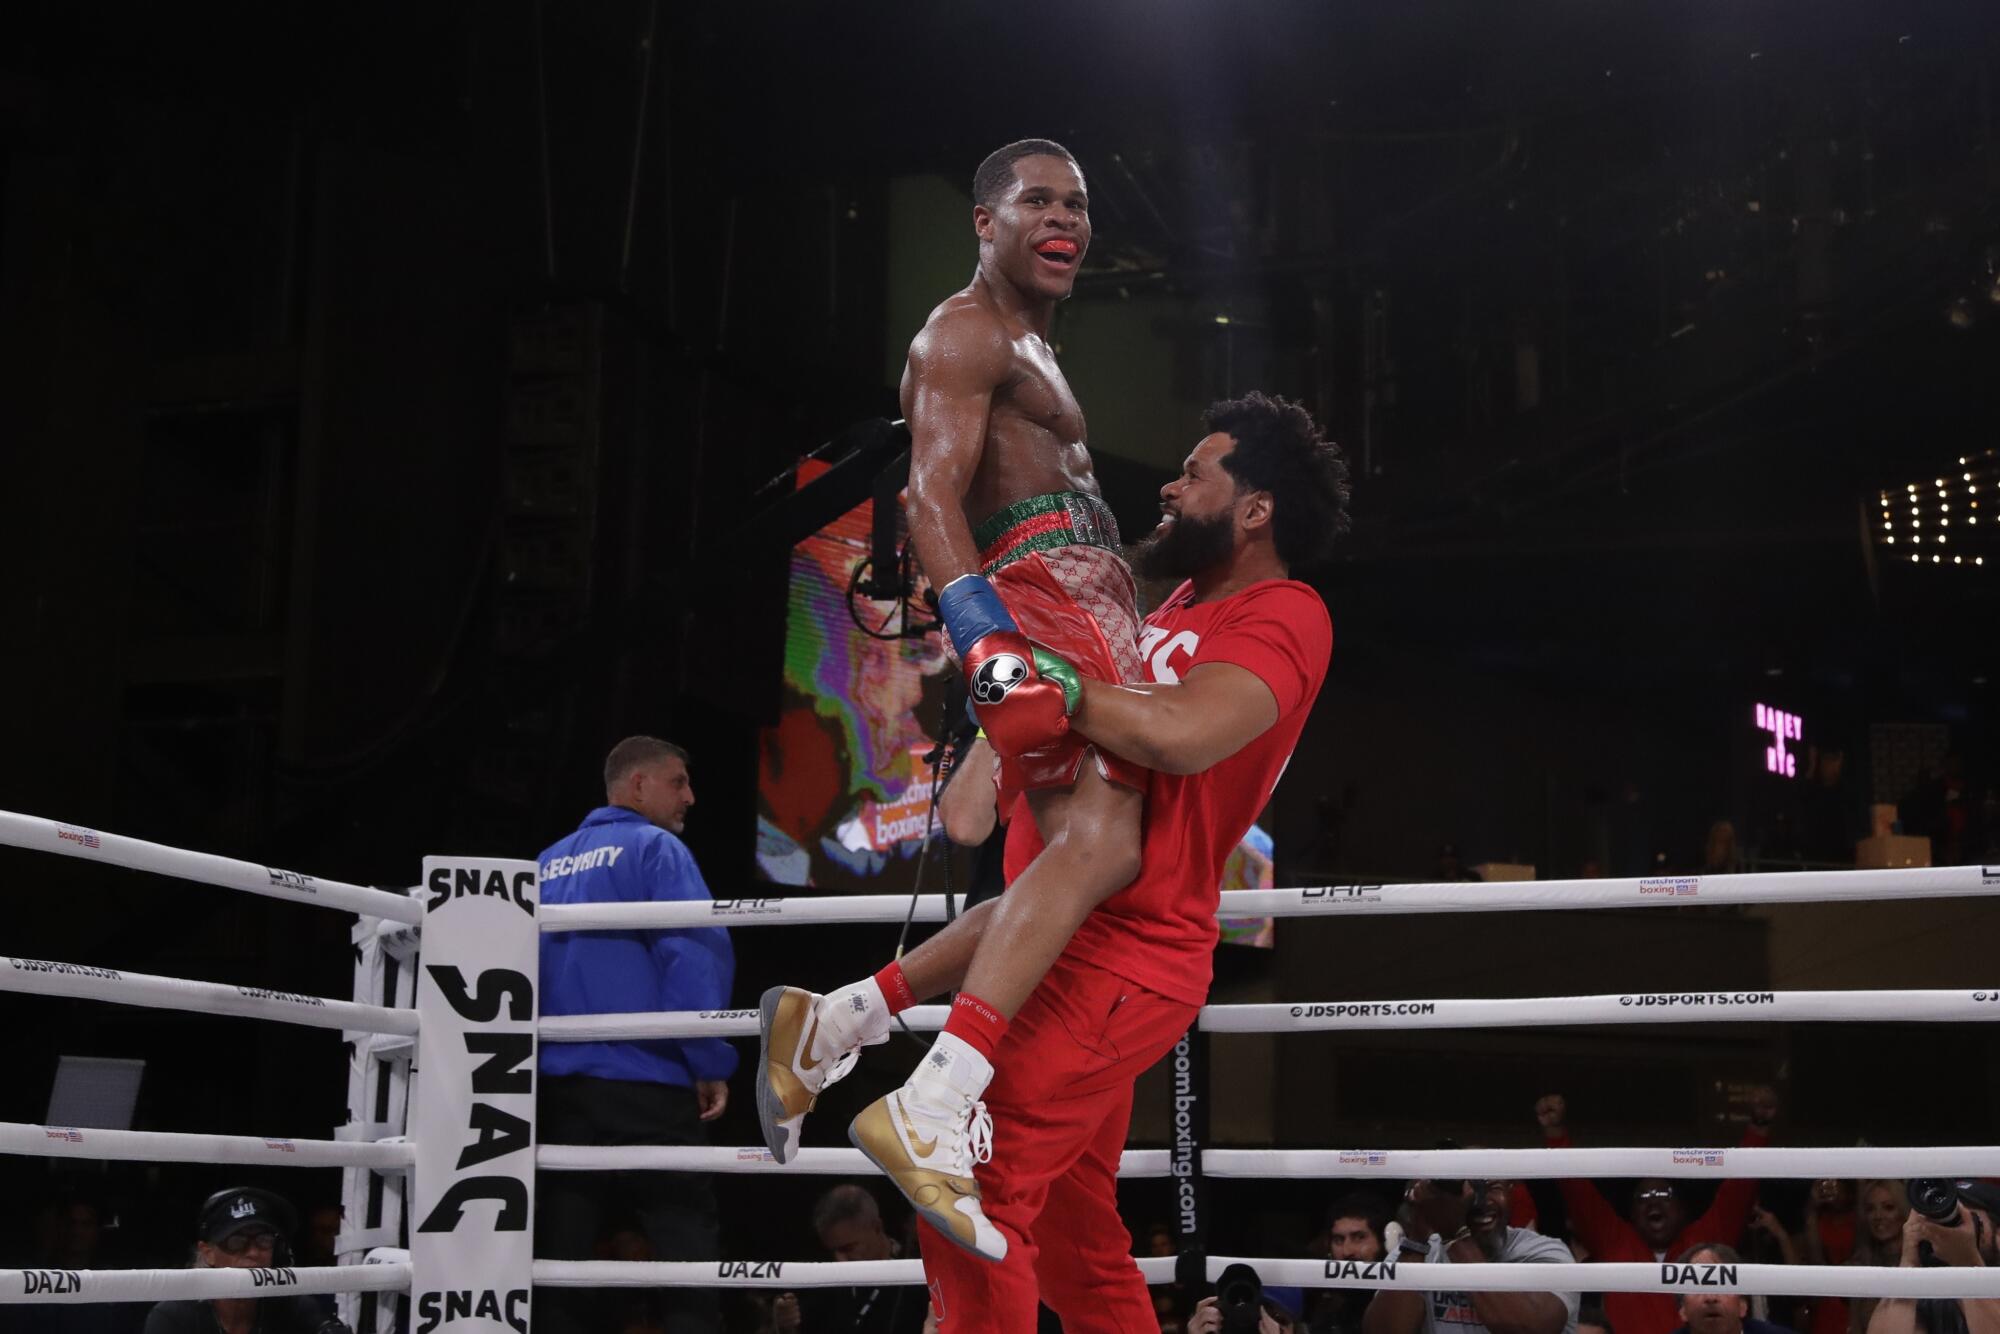 Bill Haney hoists up his son, Devin Haney, while celebrating Devin's win over Russia's Zaur Abdullaev in 2019